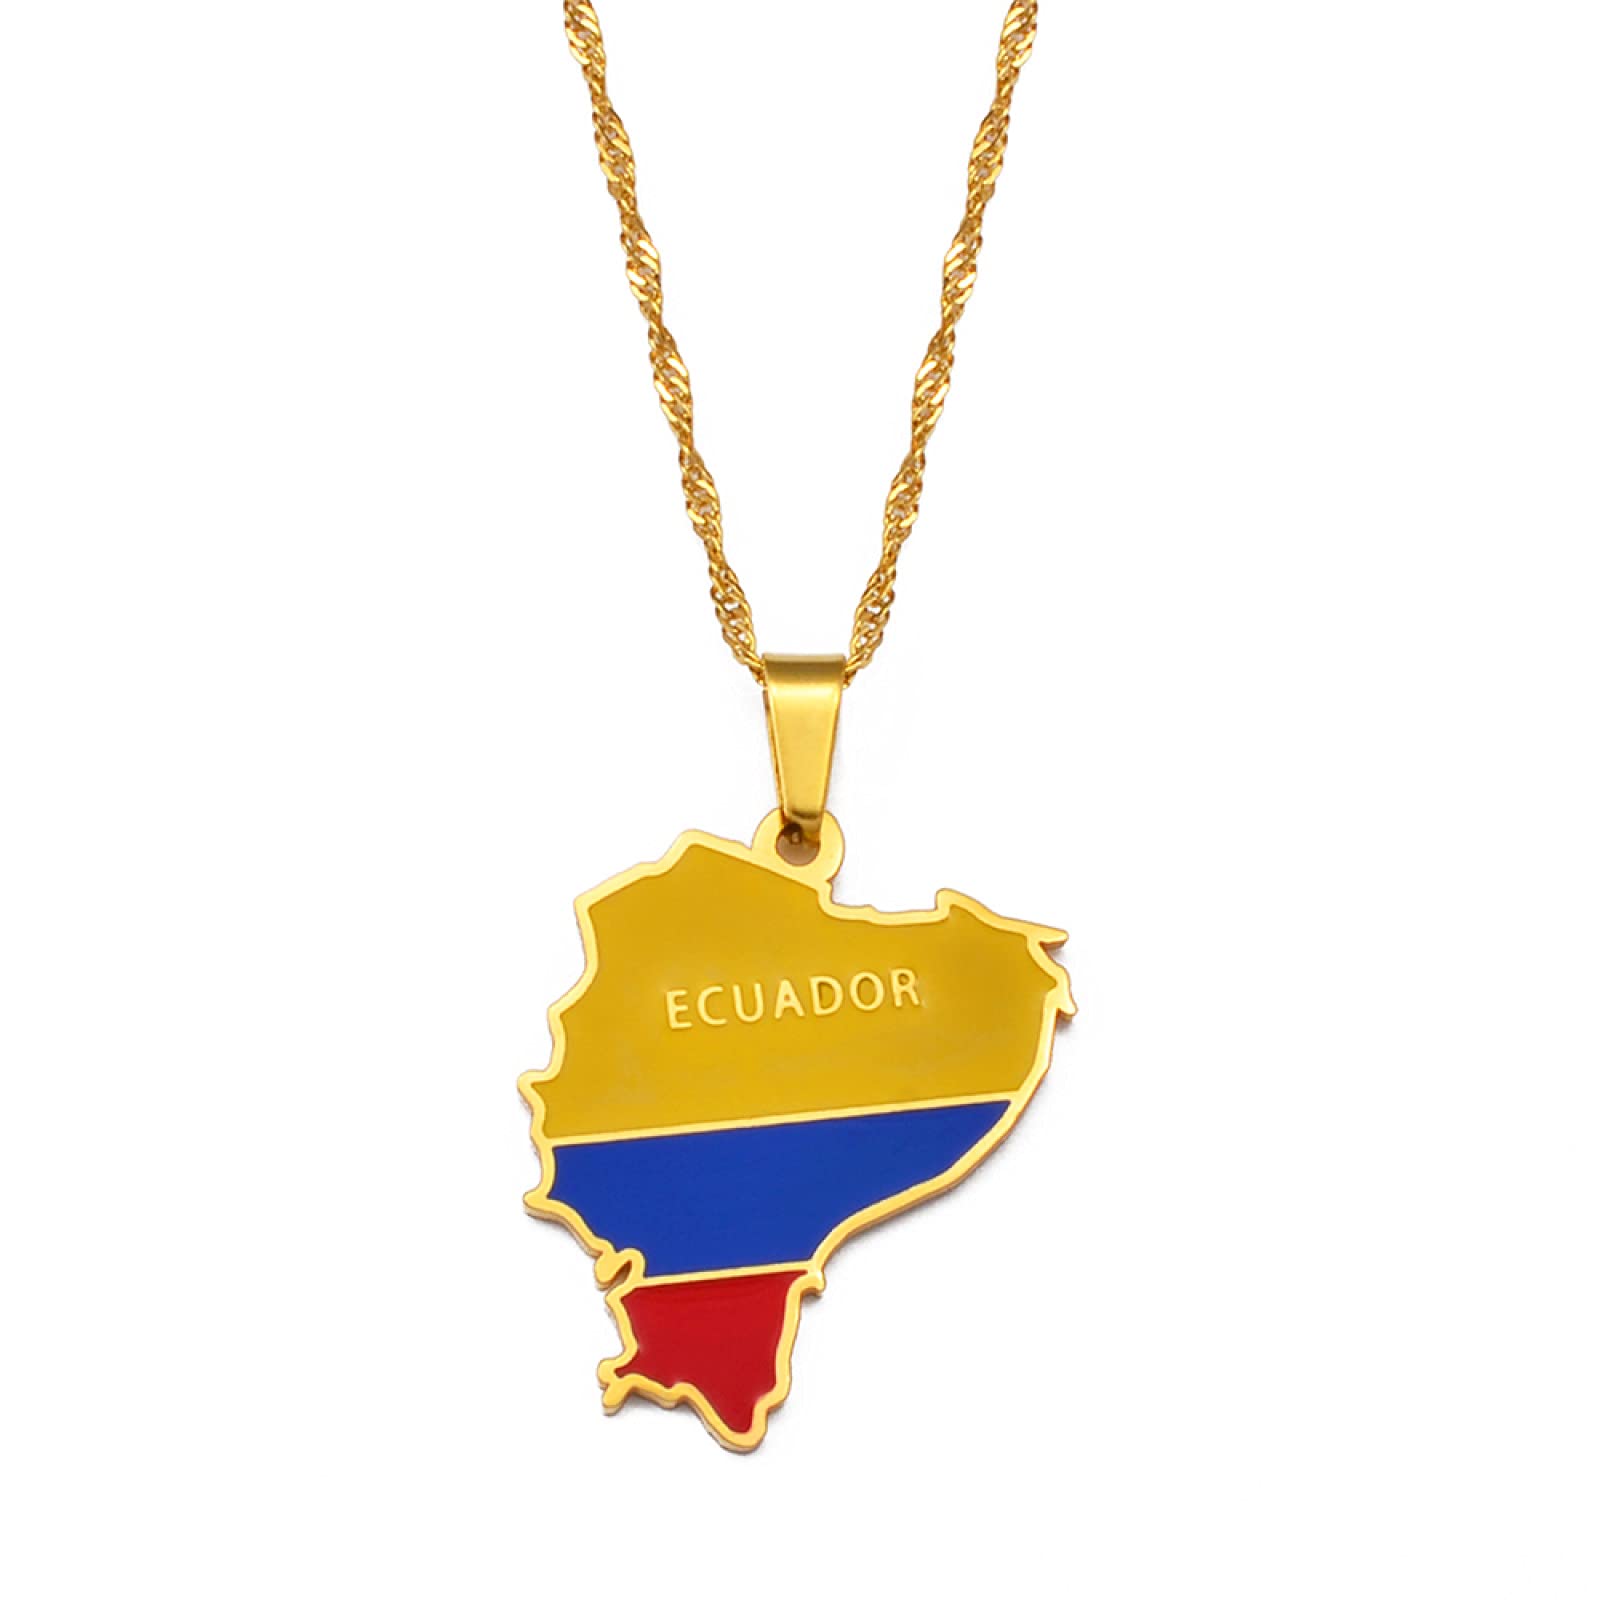 SHOUJIQQ Flag and Map of Ecuador Pendant Necklaces - Ethnic Hip Hop Country Maps Necklace for Women Men Charm Jewelry Clavic